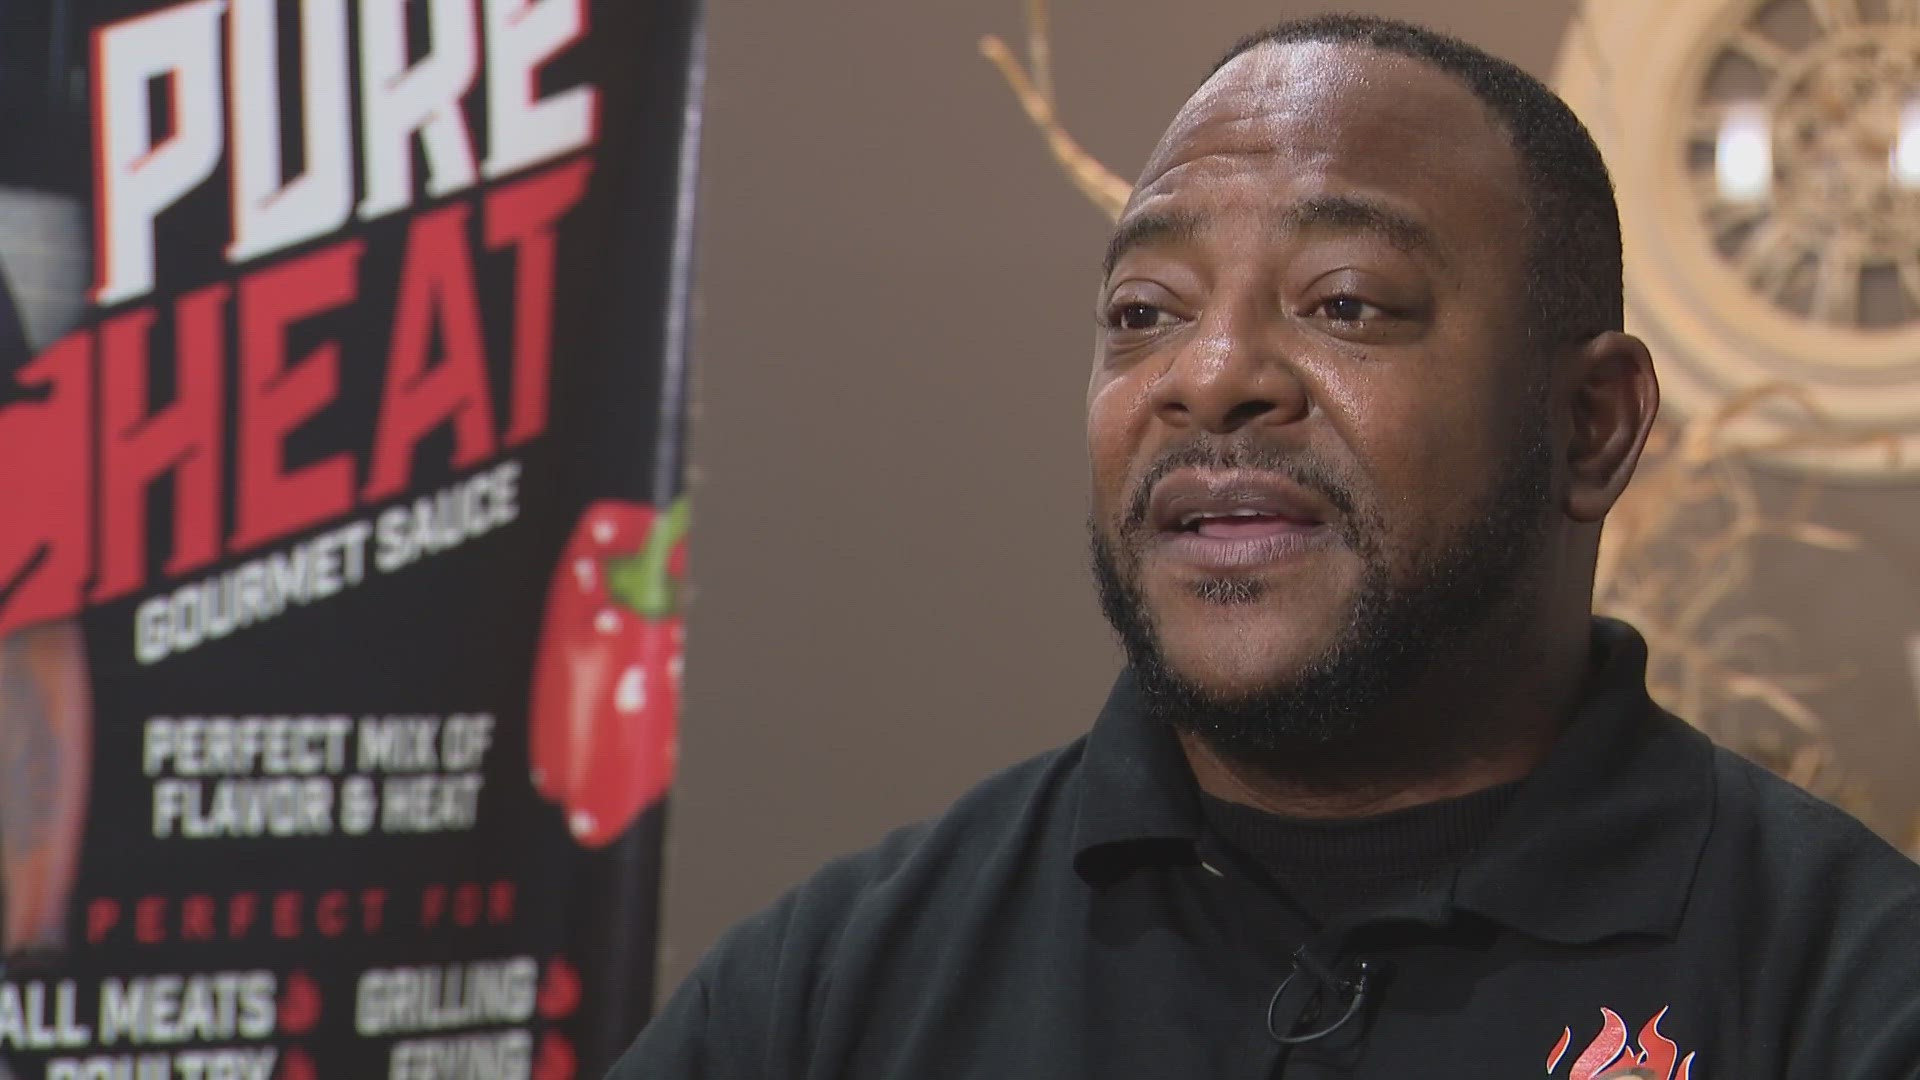 Smith wants to support the community. Smith is opening a treatment center in East St. Louis with his hot sauce empire.